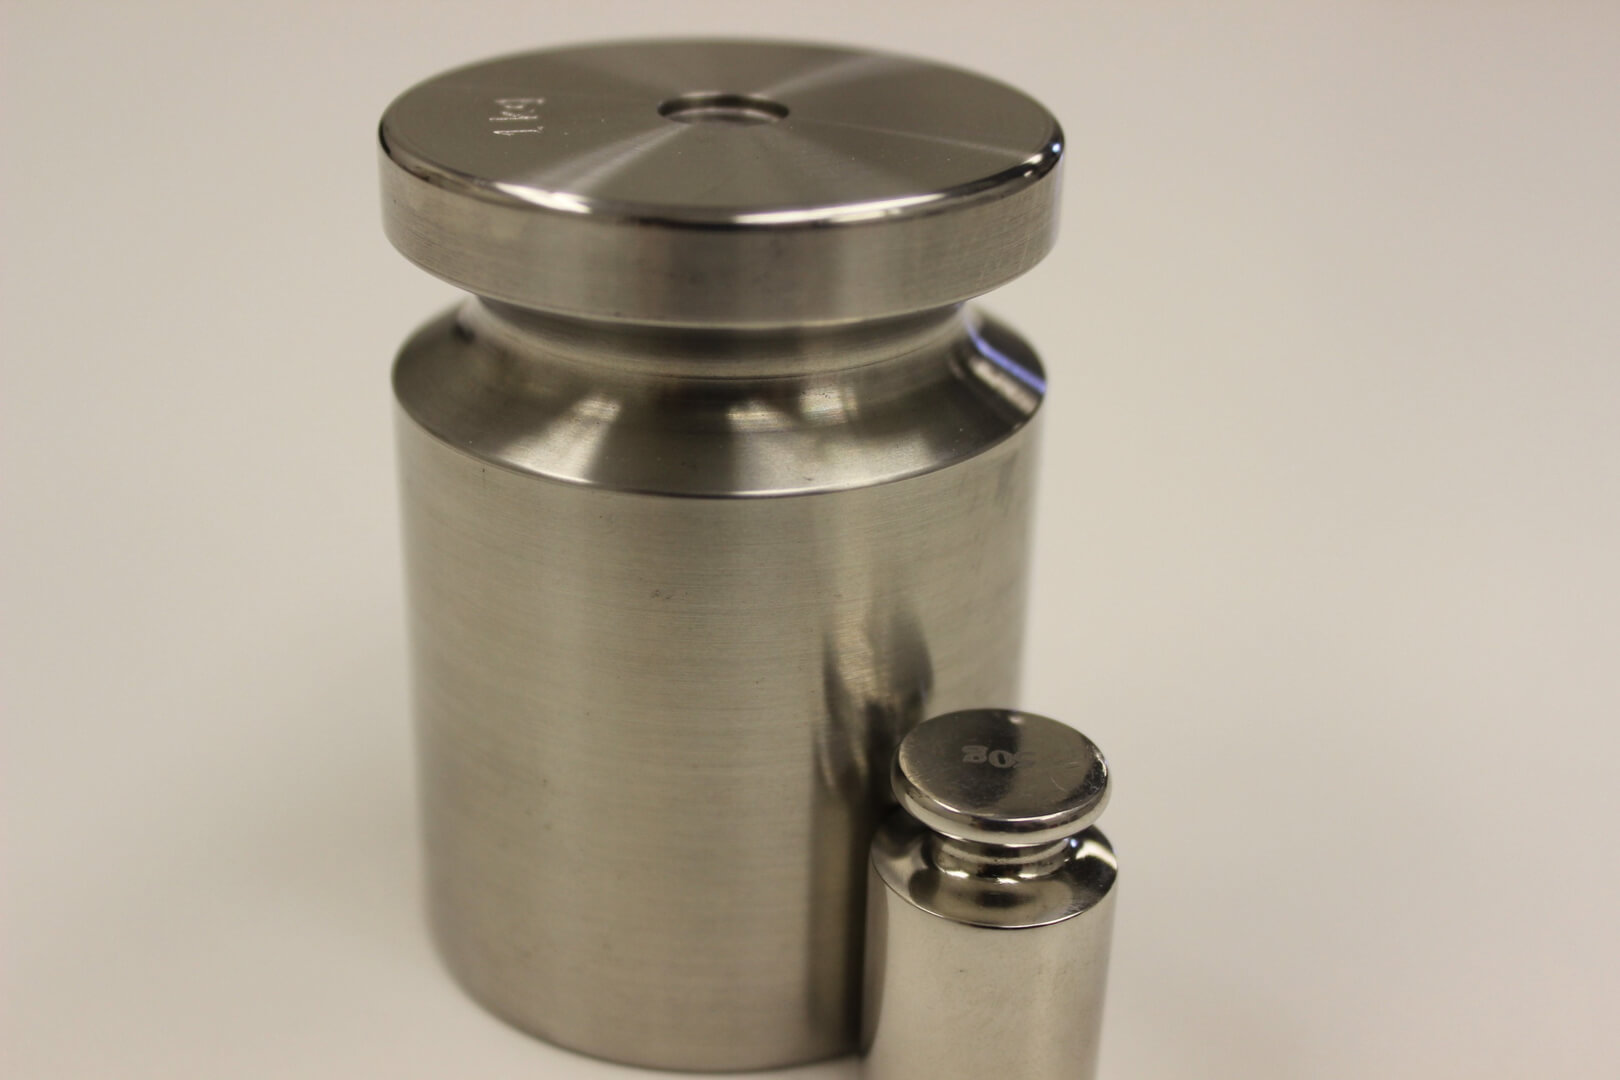 Big and small metal canisters